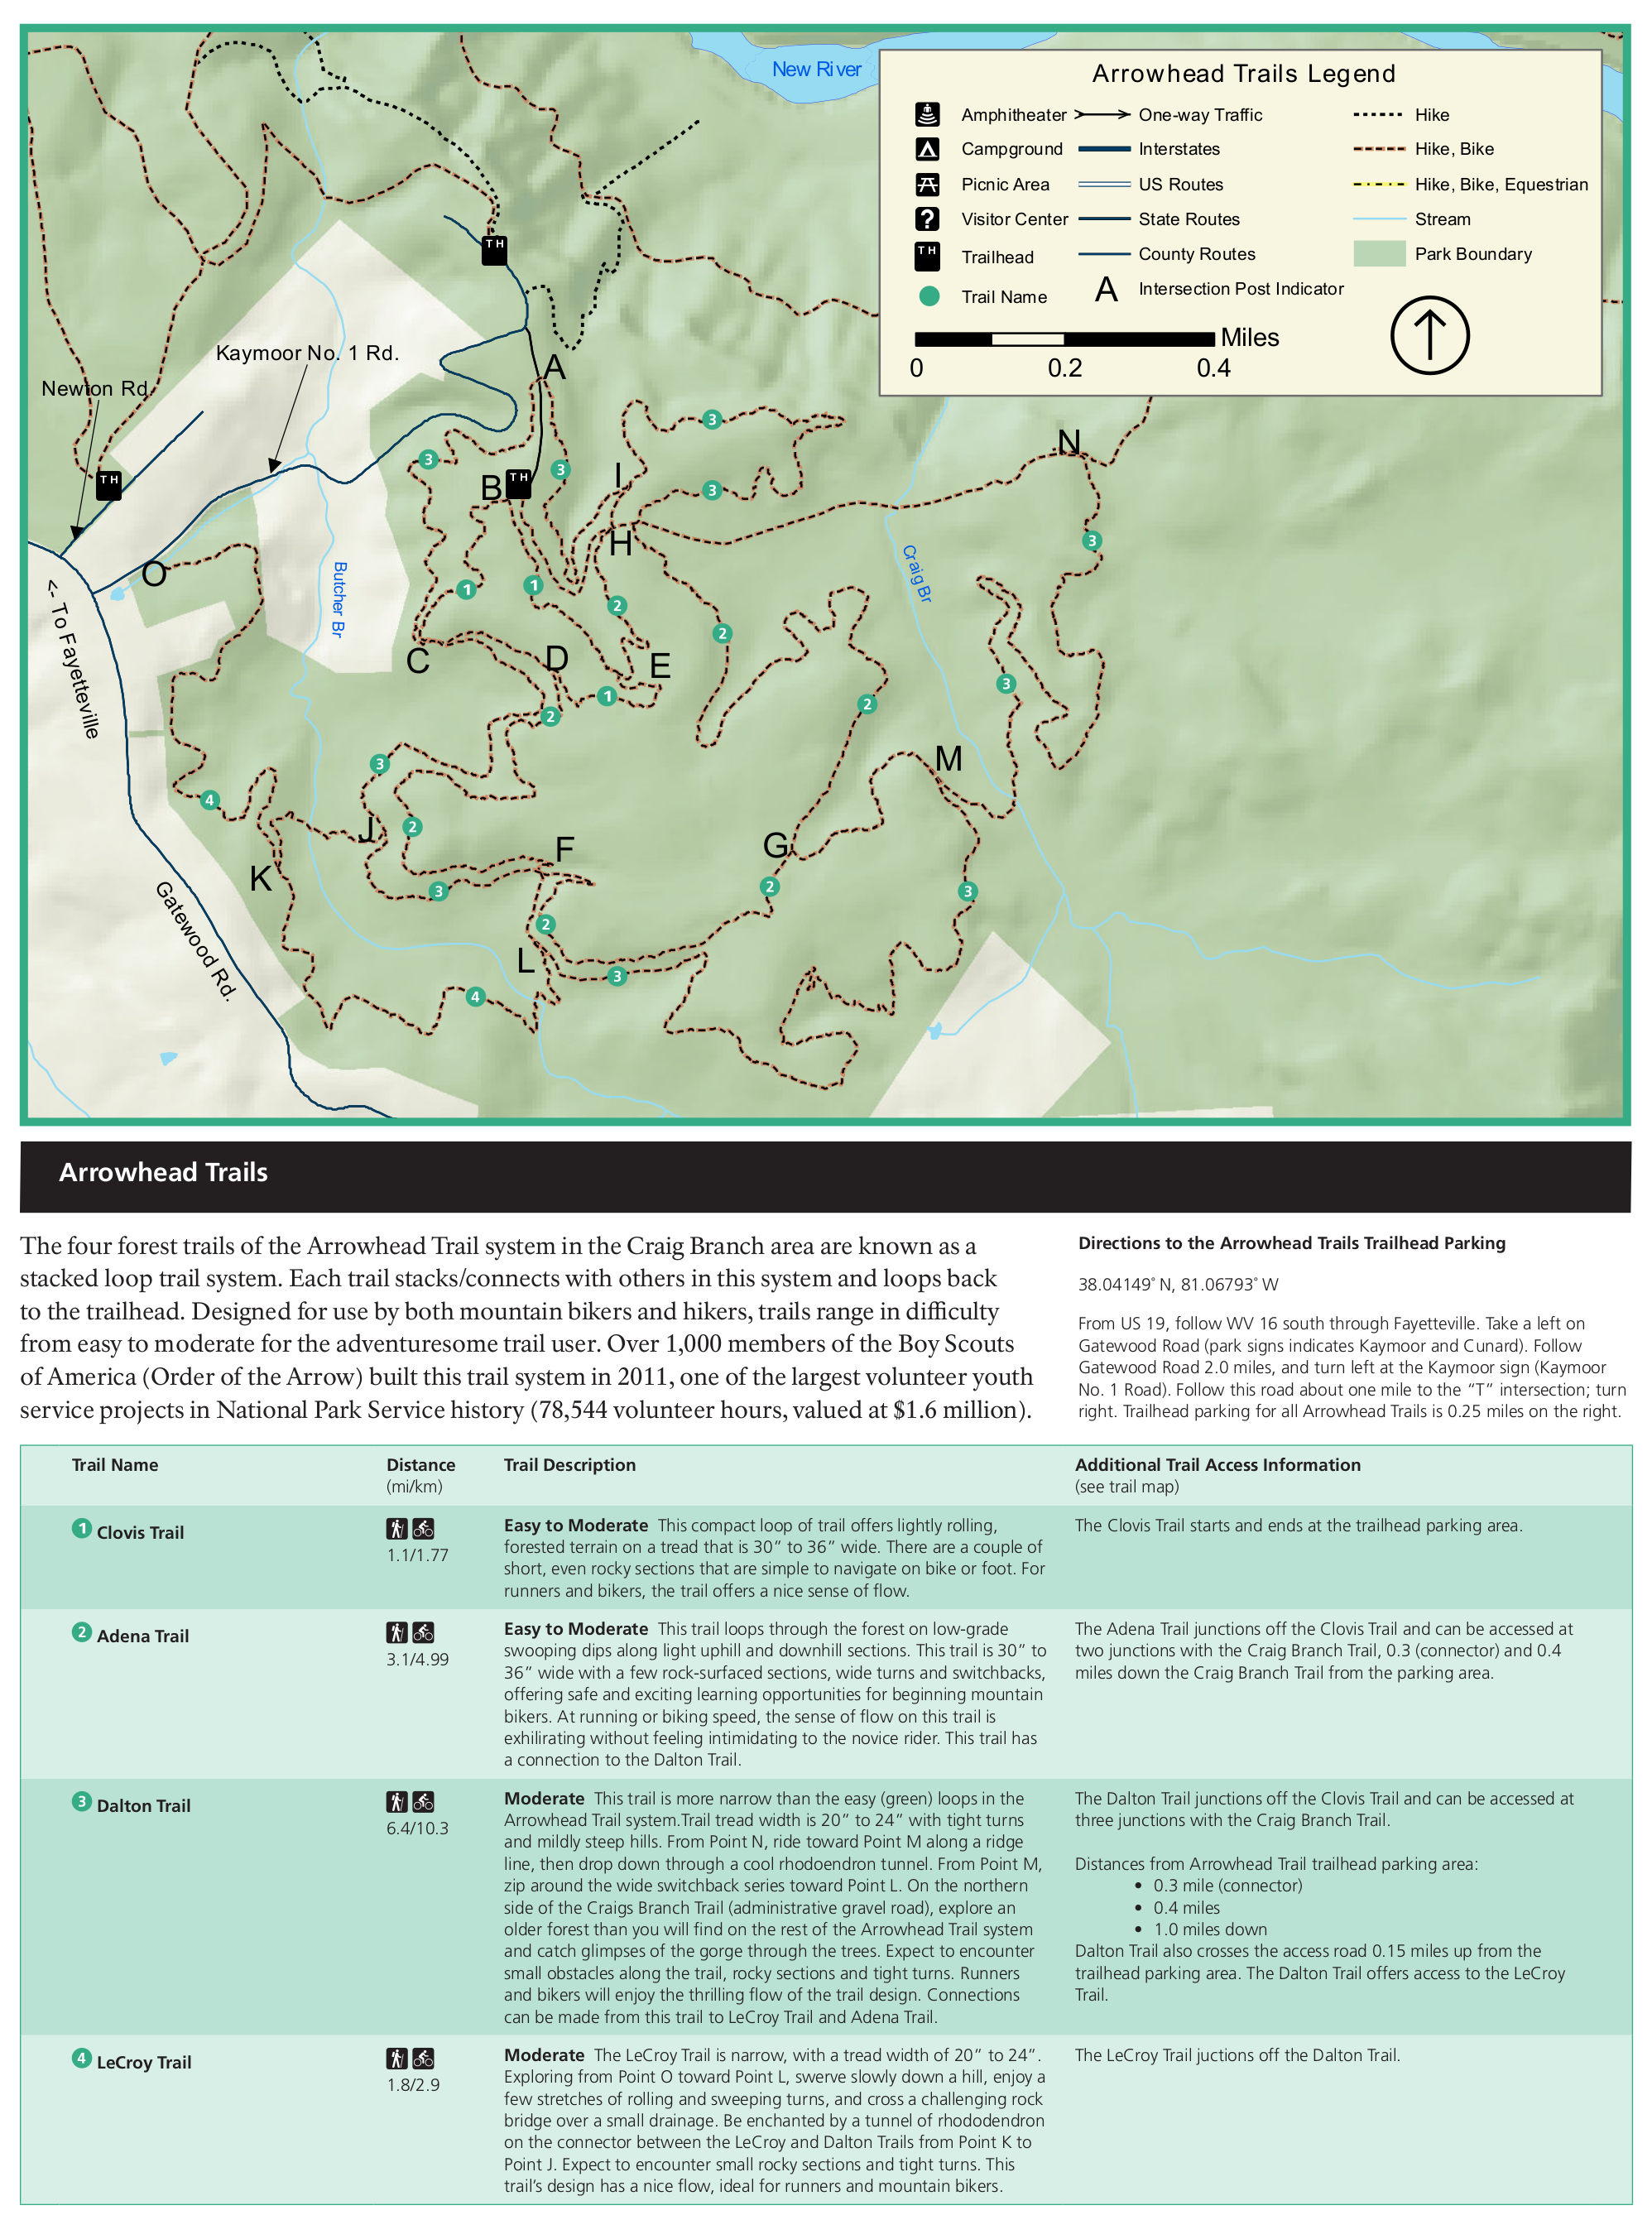 New River Trail Elevation Map - Map of world